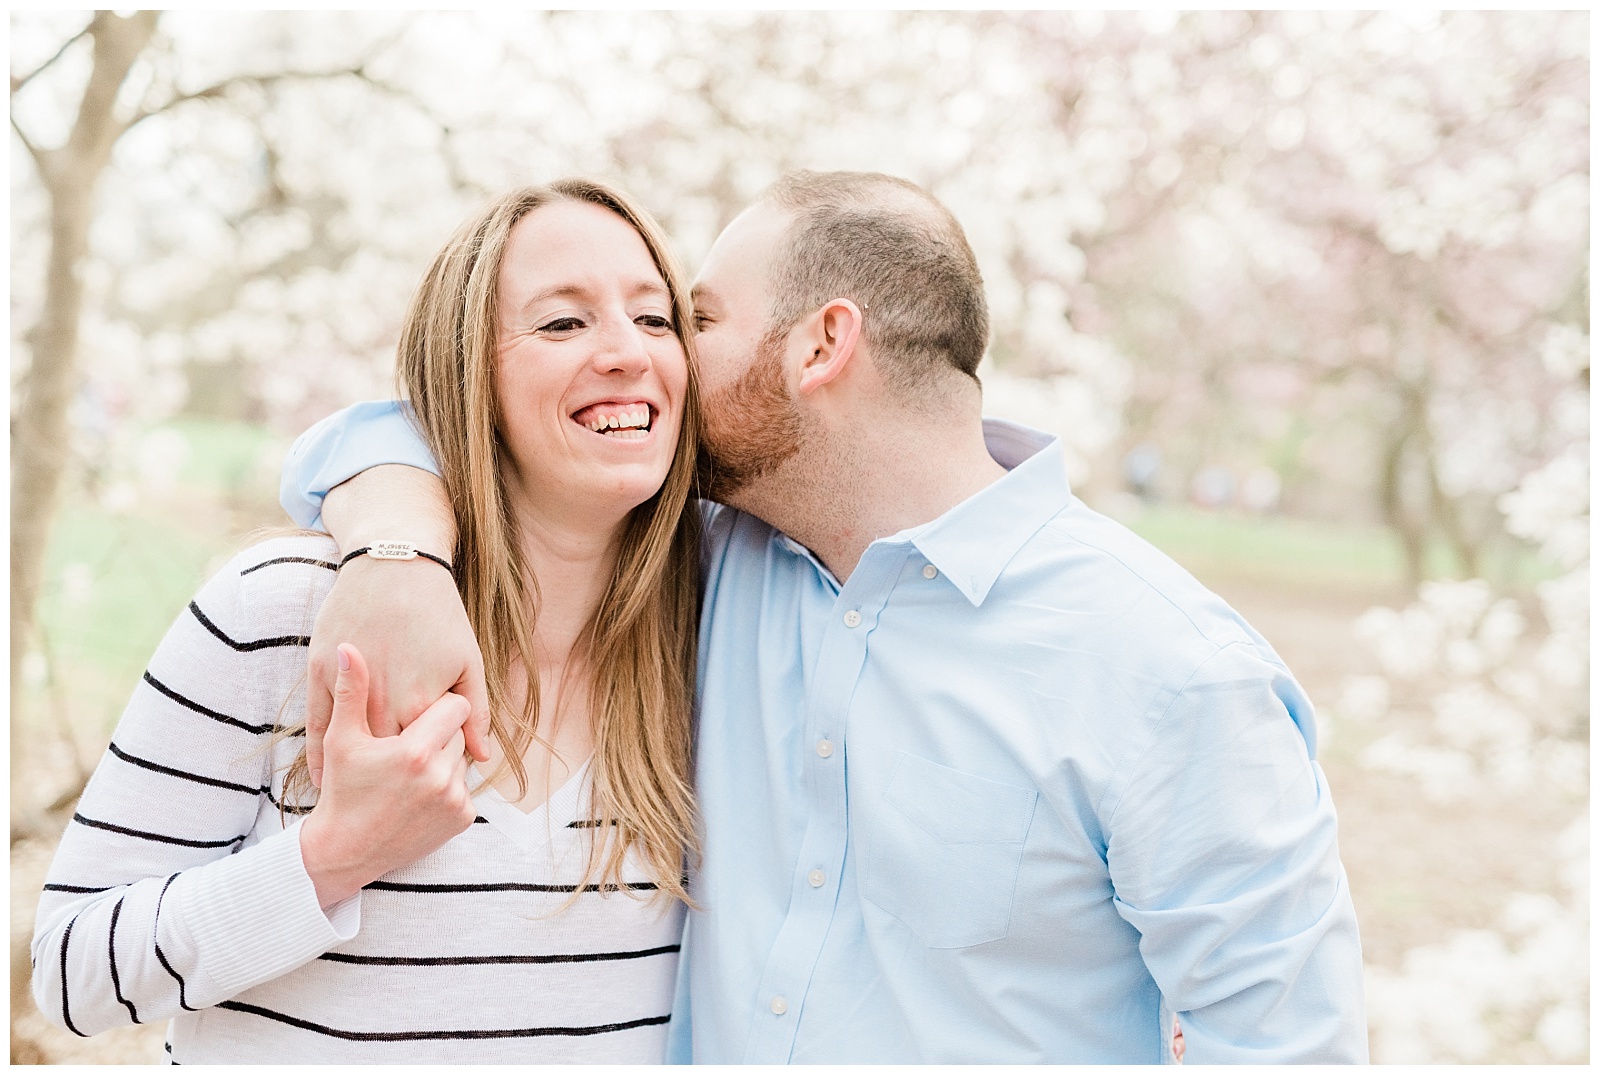 Central Park, NYC engagement session, springtime, wedding photographer, New York, light and airy, cherry blossoms